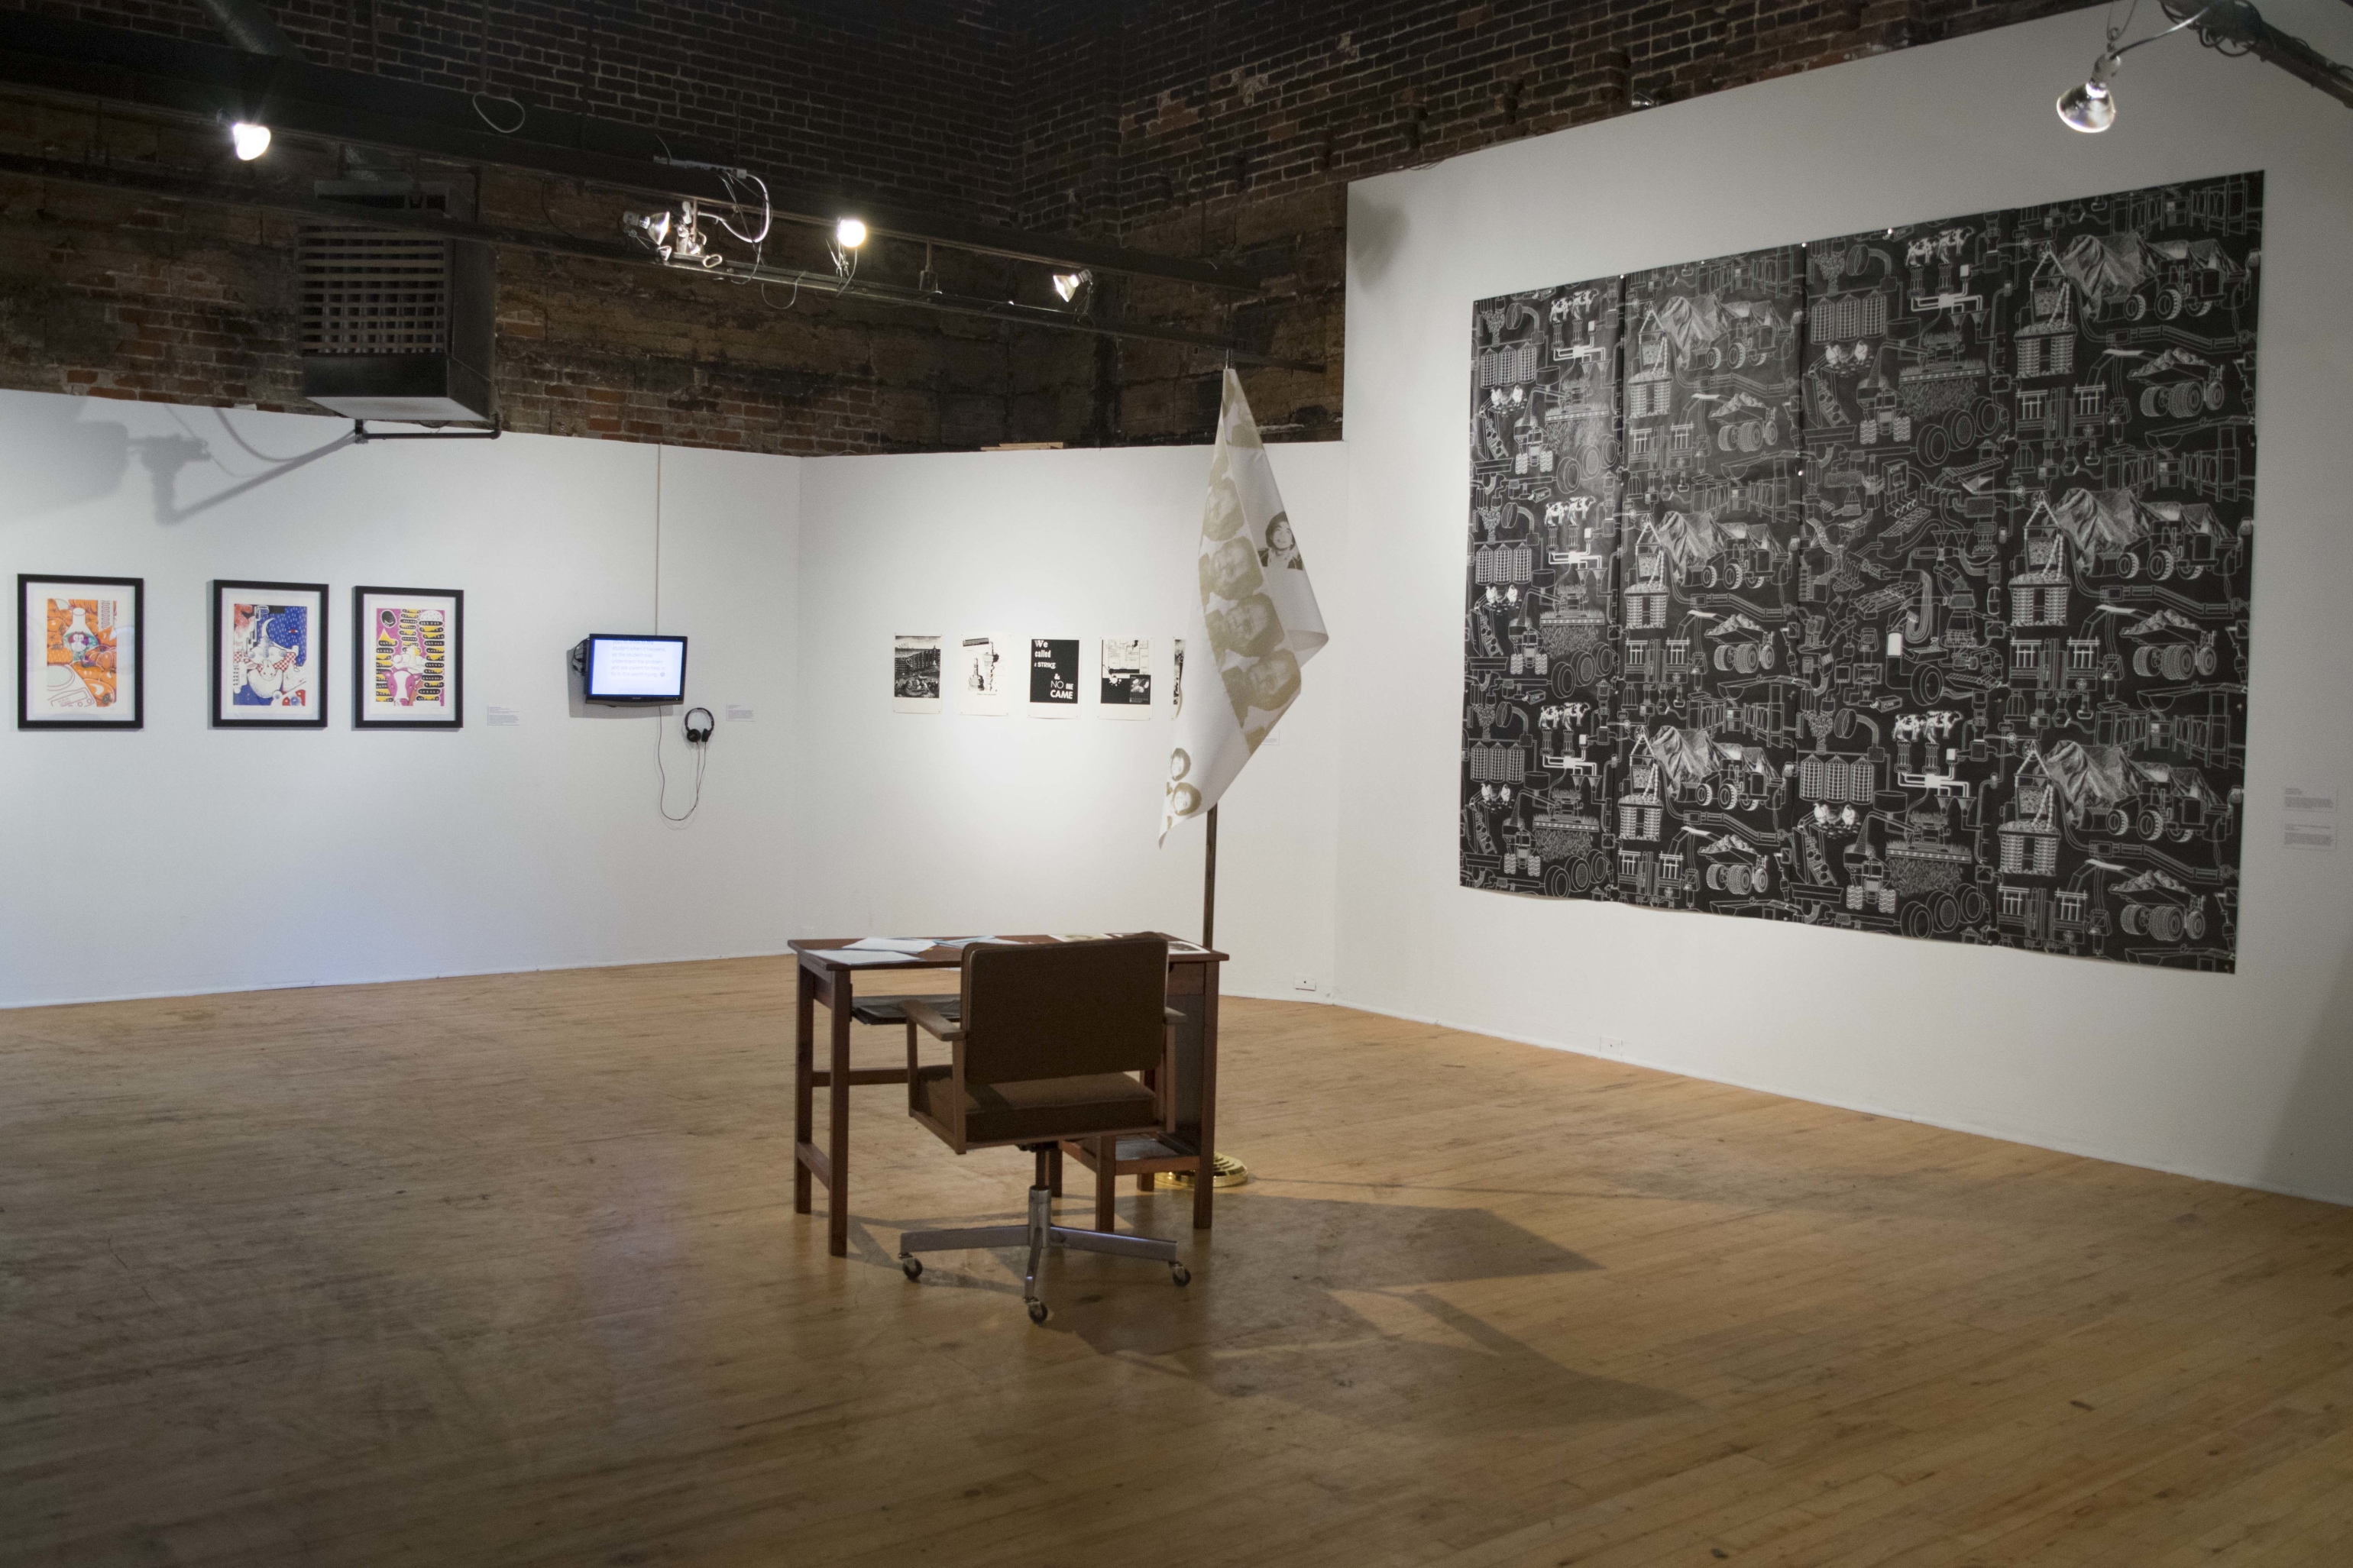 FA.6 FORGING AMERICAN: ART IN THE WORKINGS ON AN ASIAN AMERICAN RUST BELT